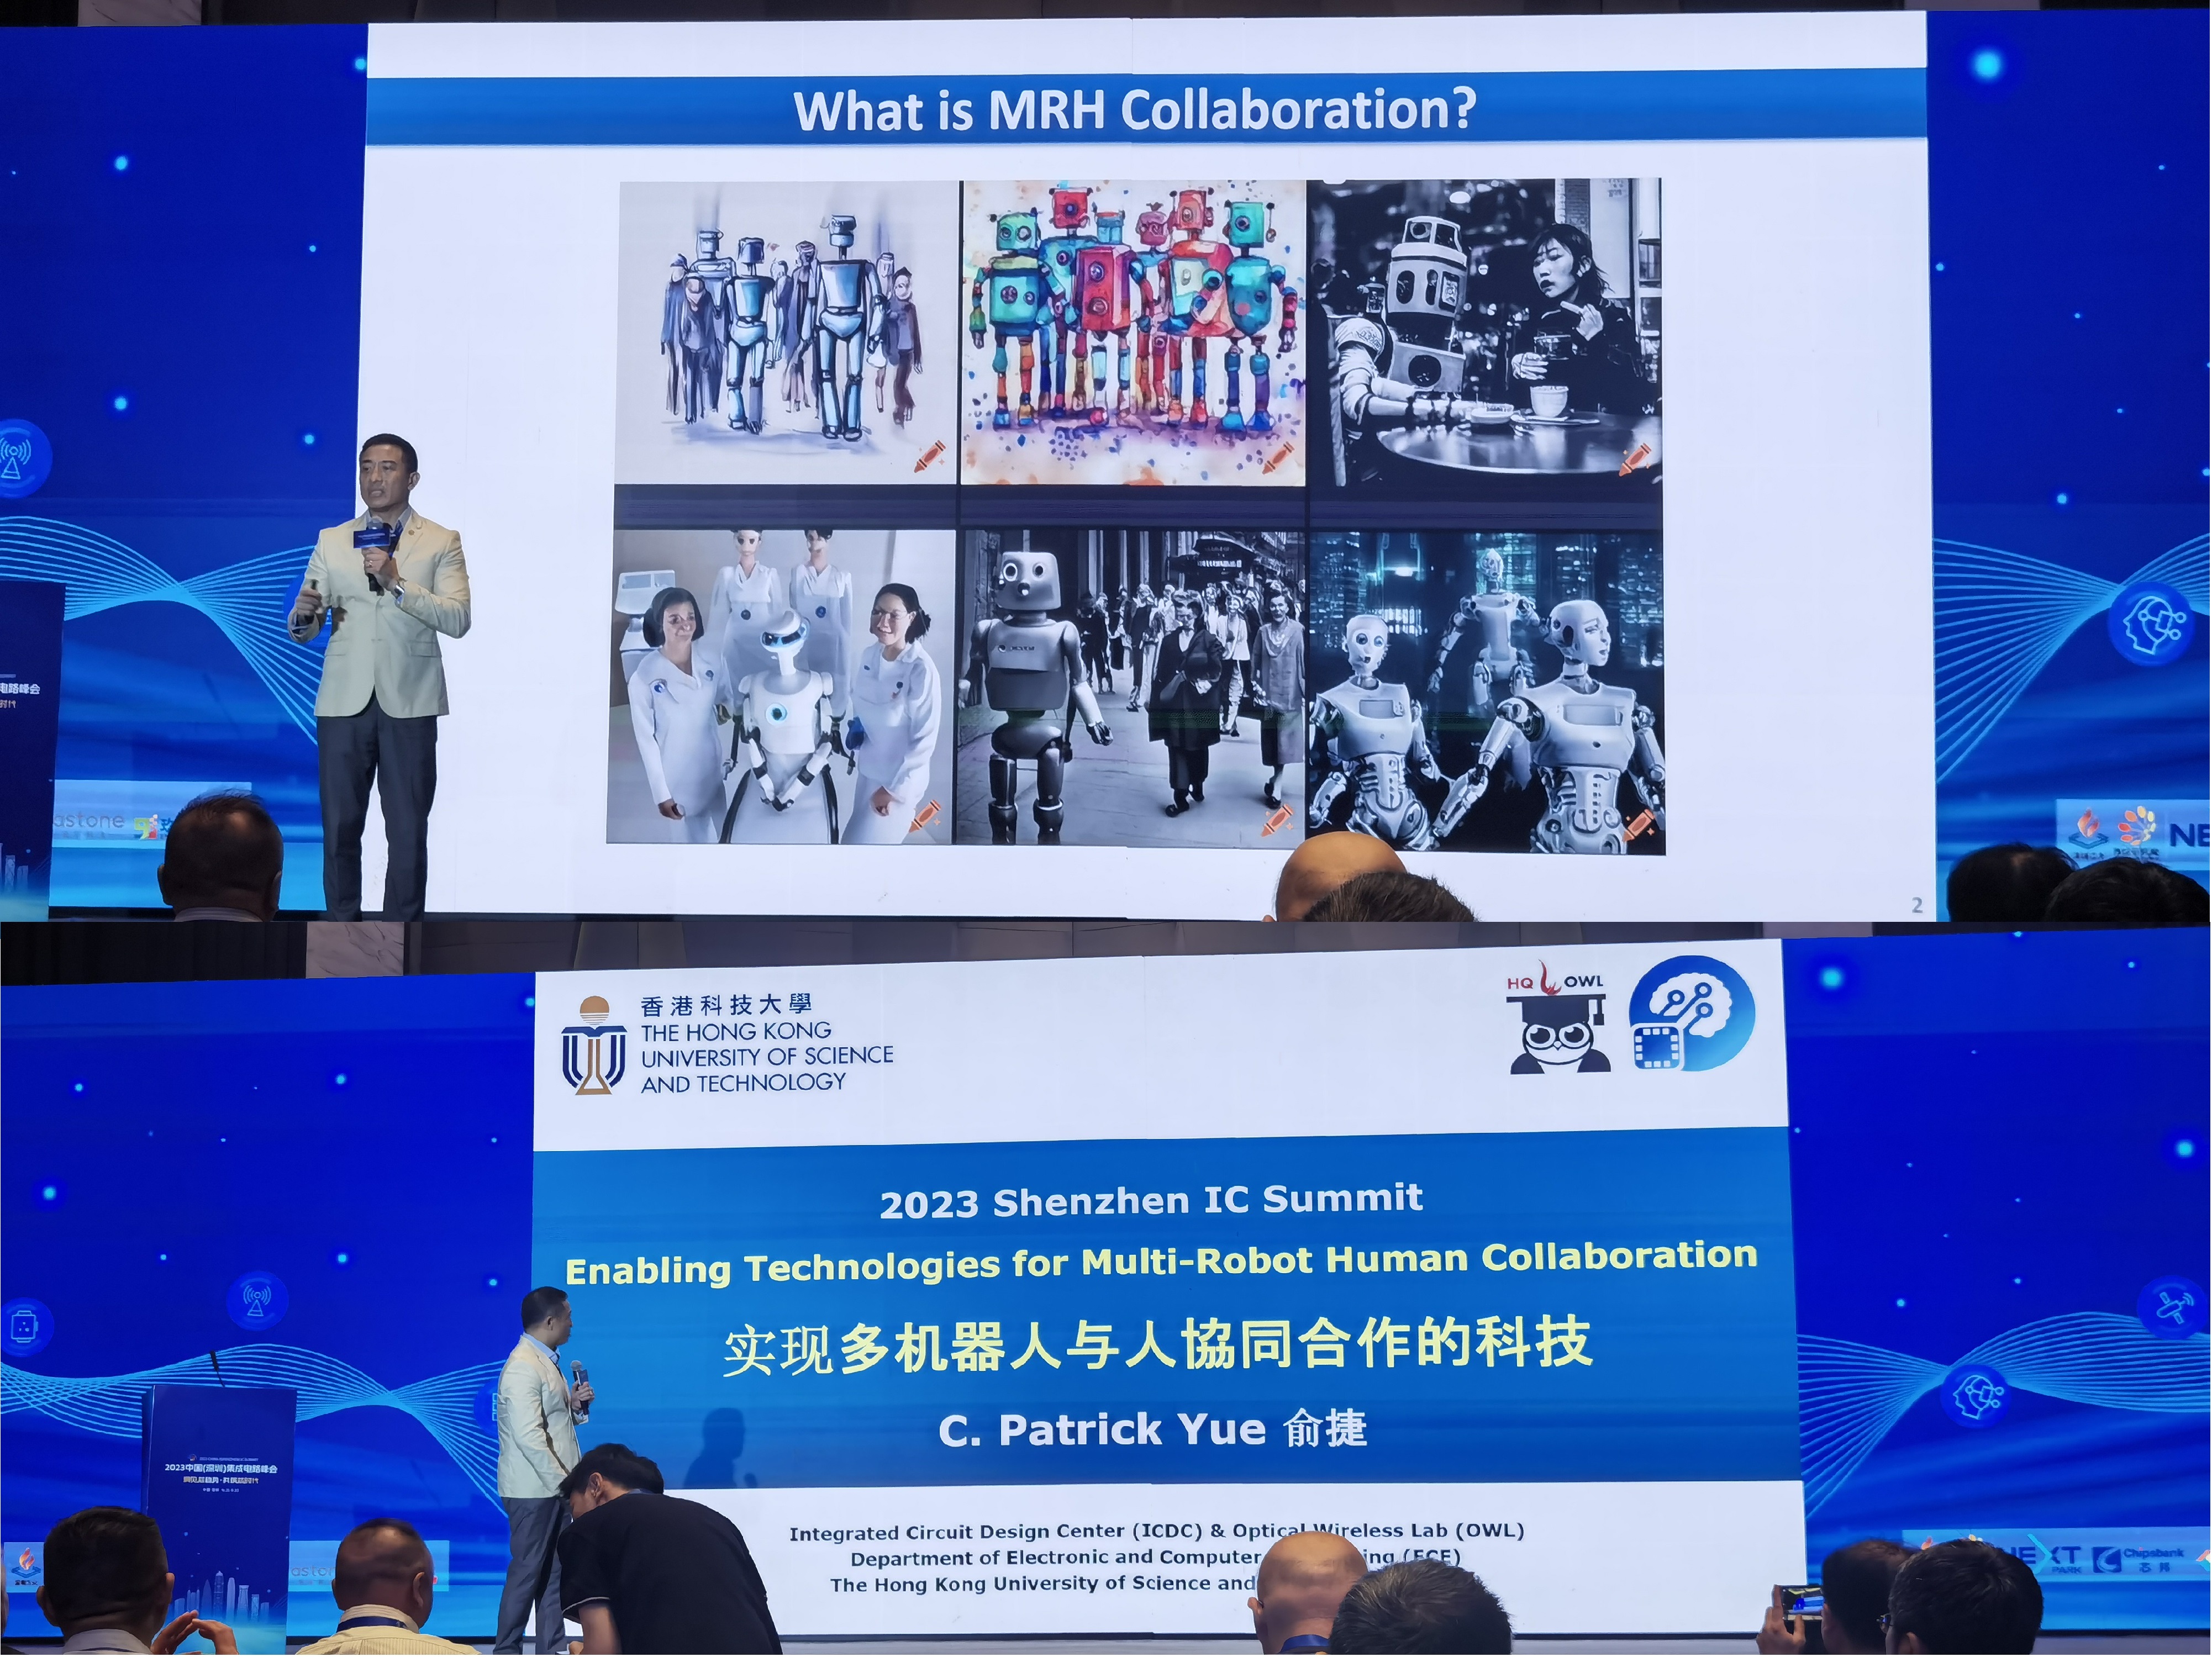 prof_yue_giving_a_lecture_on_shenzhen_ic_summit-